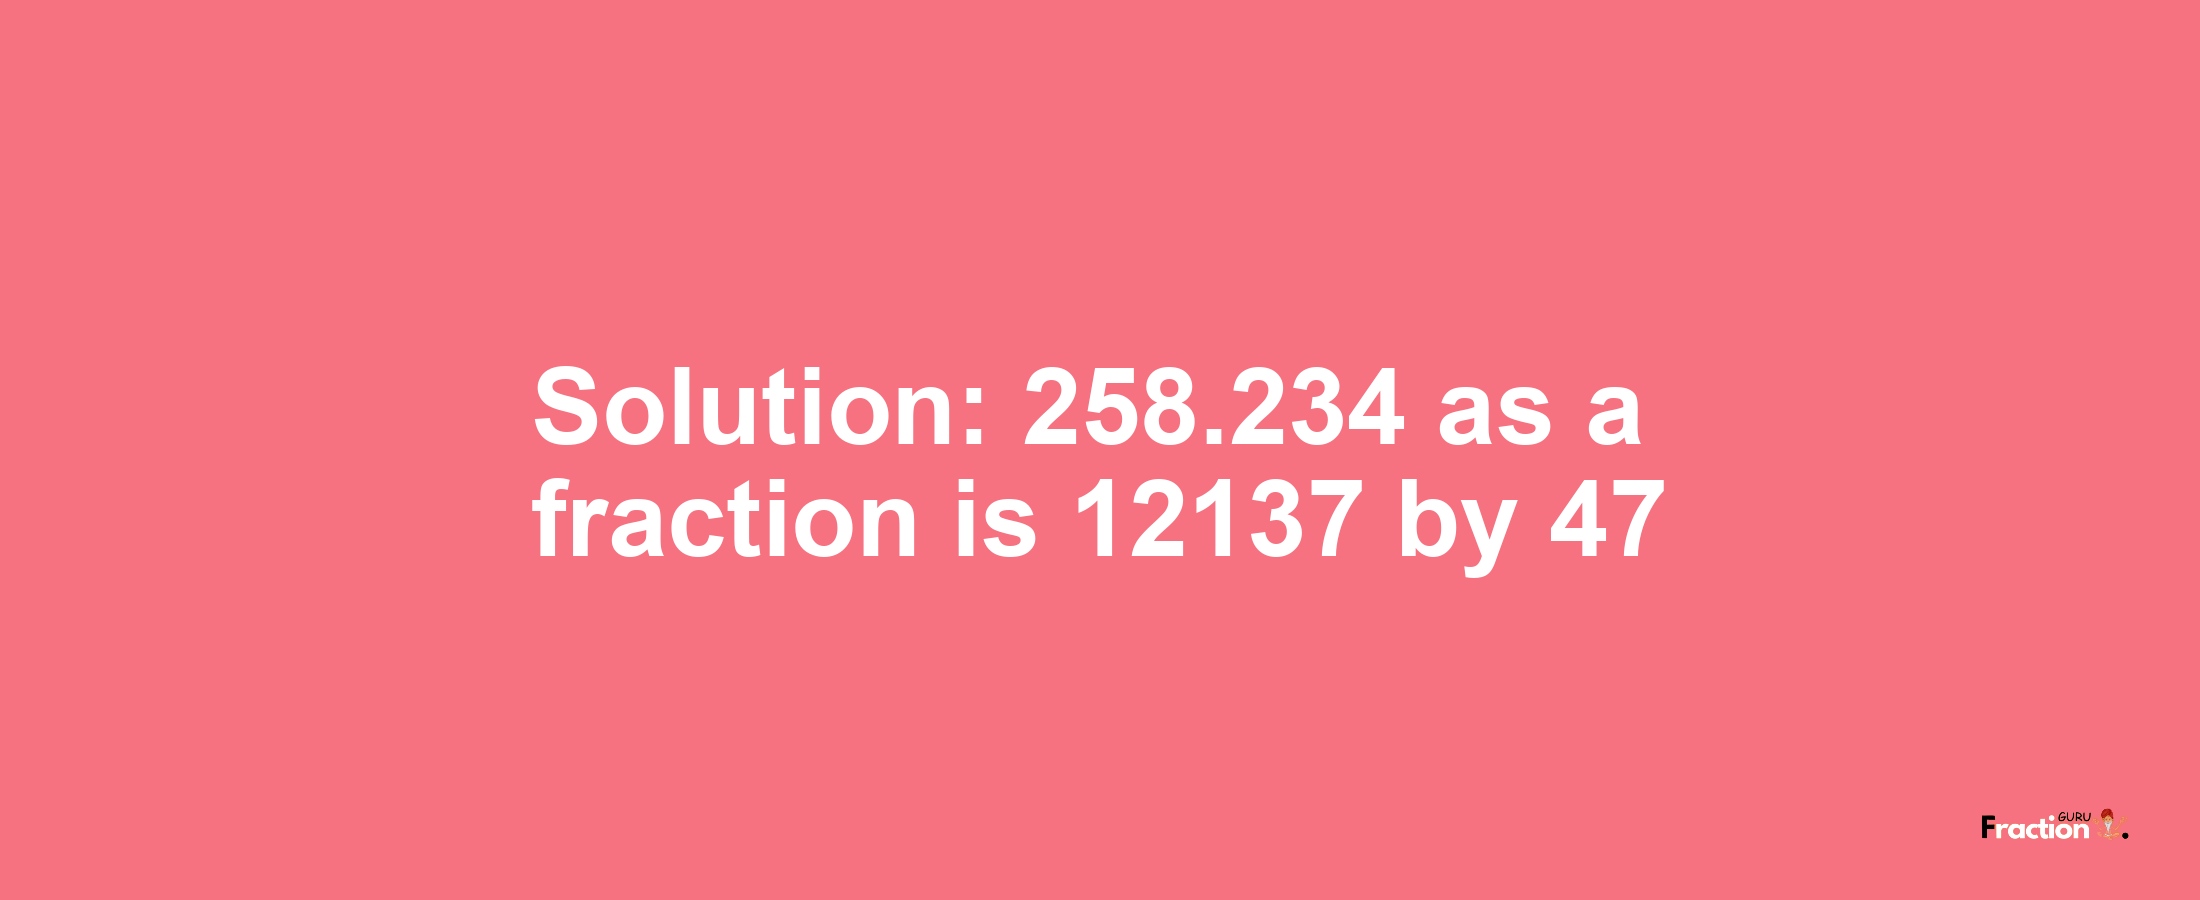 Solution:258.234 as a fraction is 12137/47